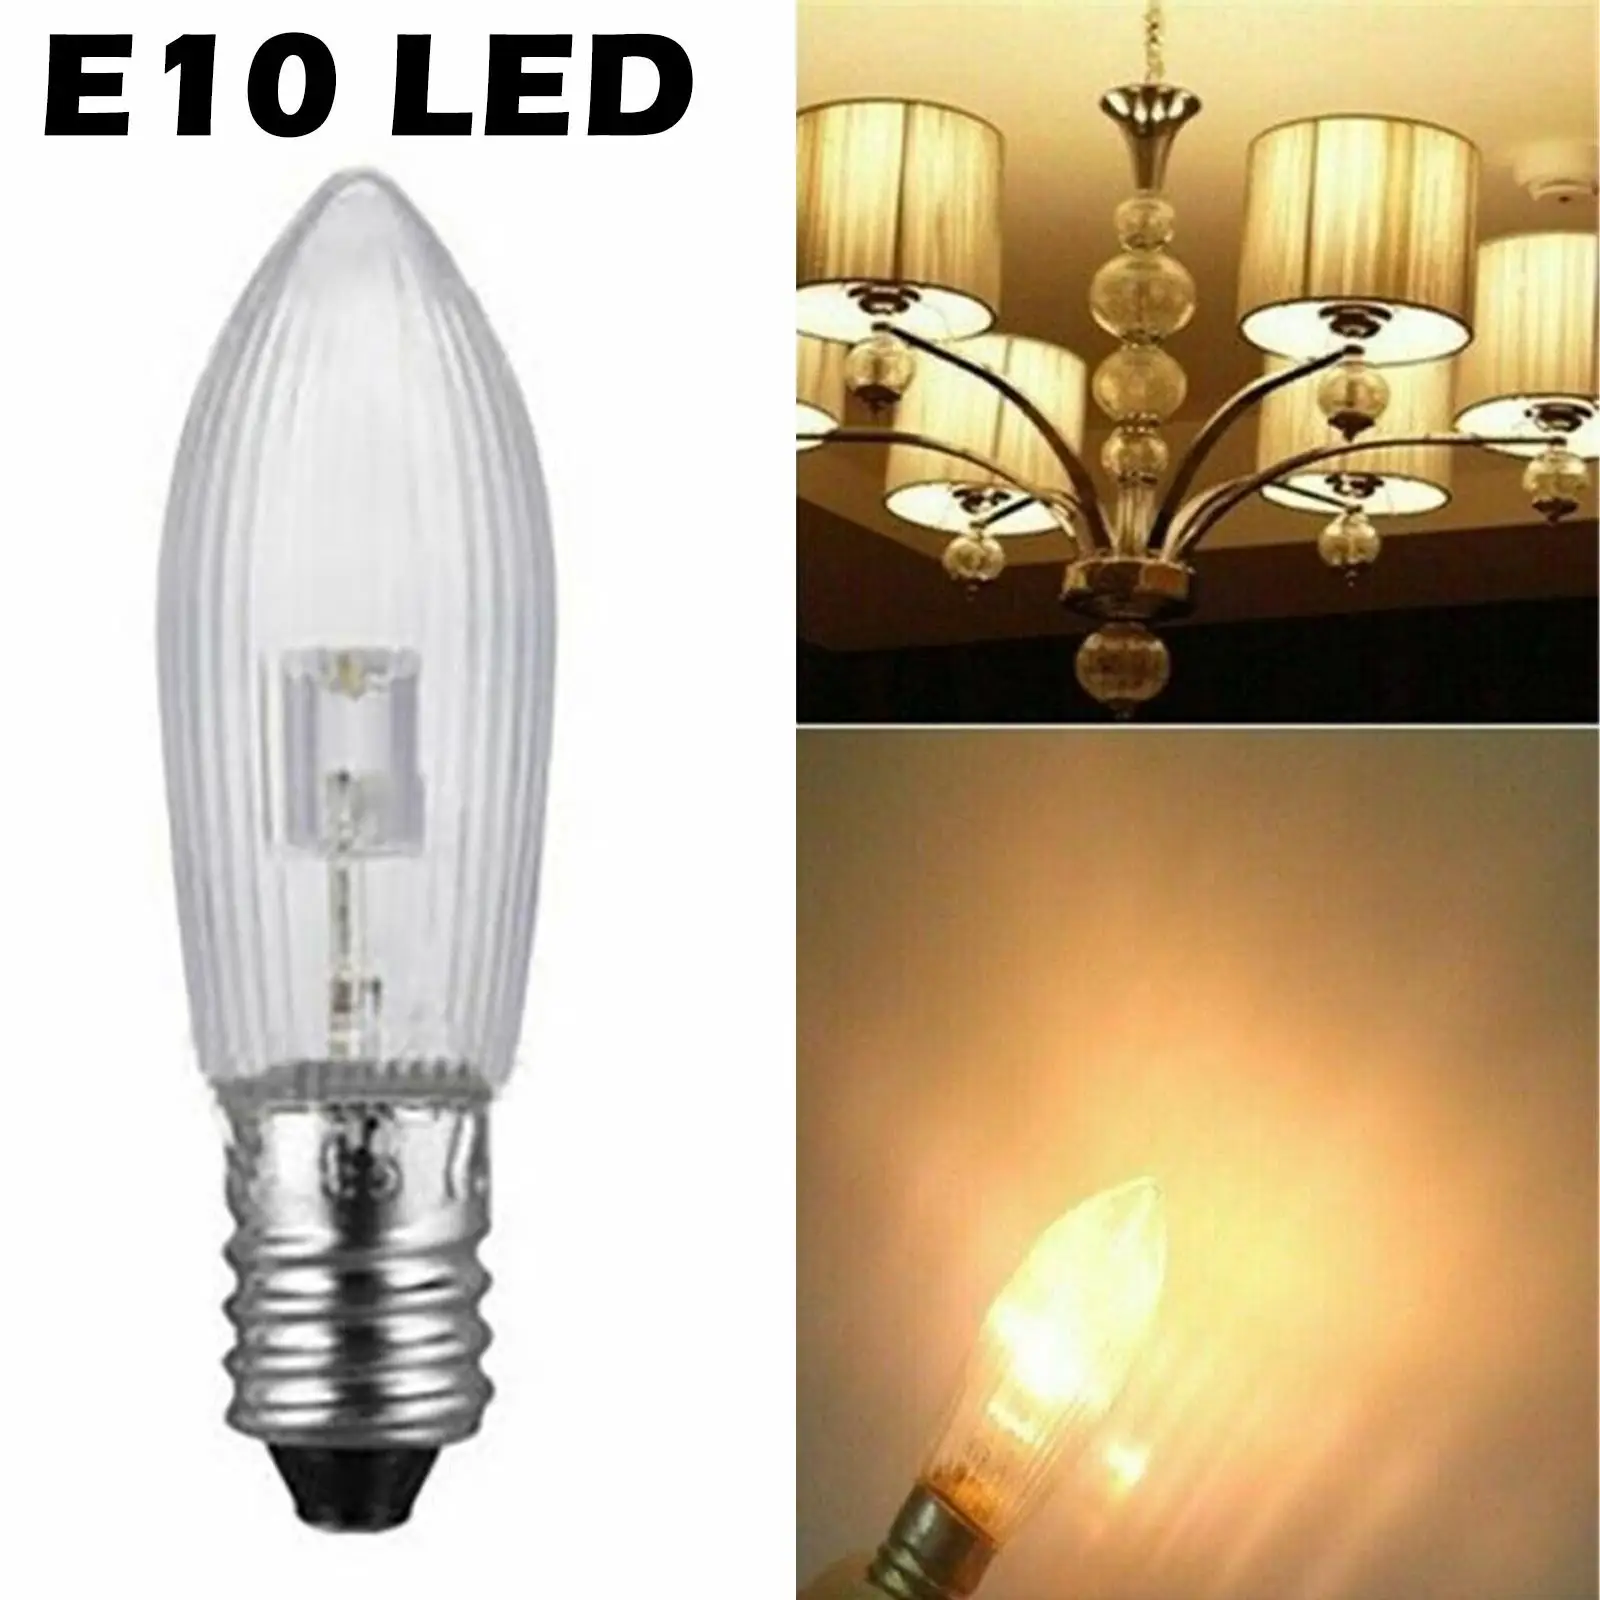 1pc E10 LED Bulbs Light Replacement Lamp Bulbs 10V-55V AC Bathroom Kitchen Home Lamps Bulb Decoration Lights For String Lig O5Q8 1pcs plastic wall hole duct cover shower faucet angle valve pipe plug decoration cover snap on plate kitchen faucet accessories